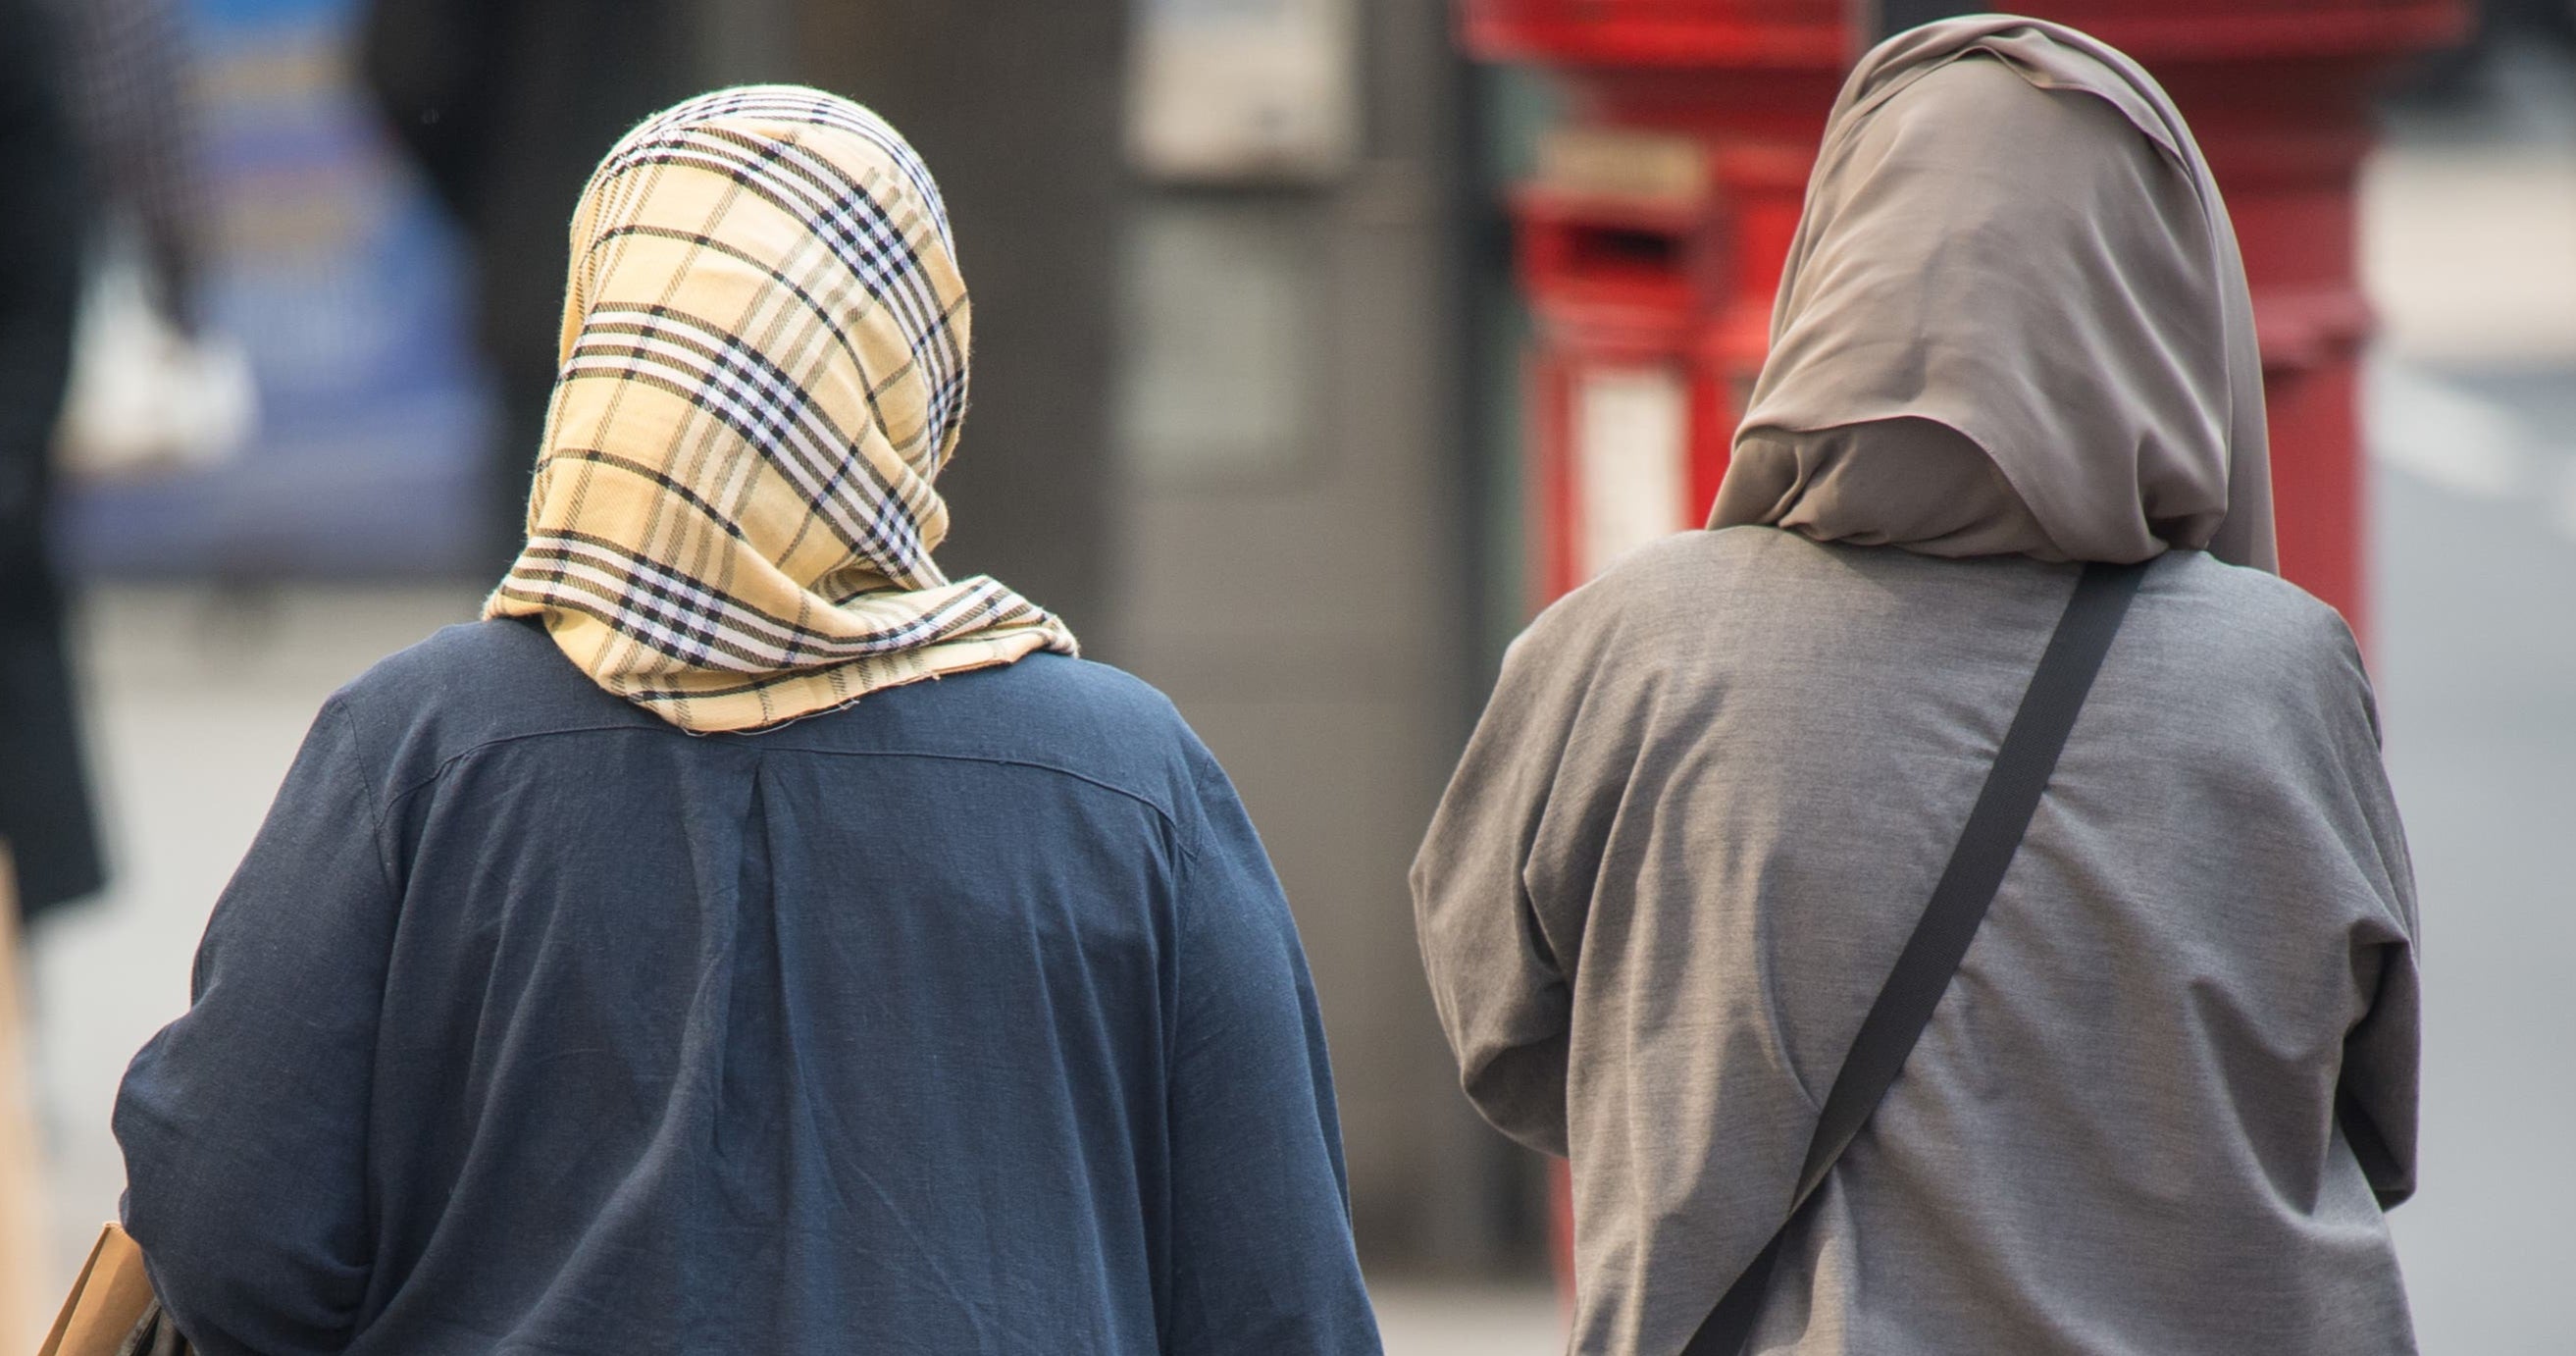 Over 65 per cent of all Islamophobic hate crimes are targeted against Muslim women, with Muslim women who wear the hijab or niqab head covering overwhelmingly targeted, according to data from Tell Mama.